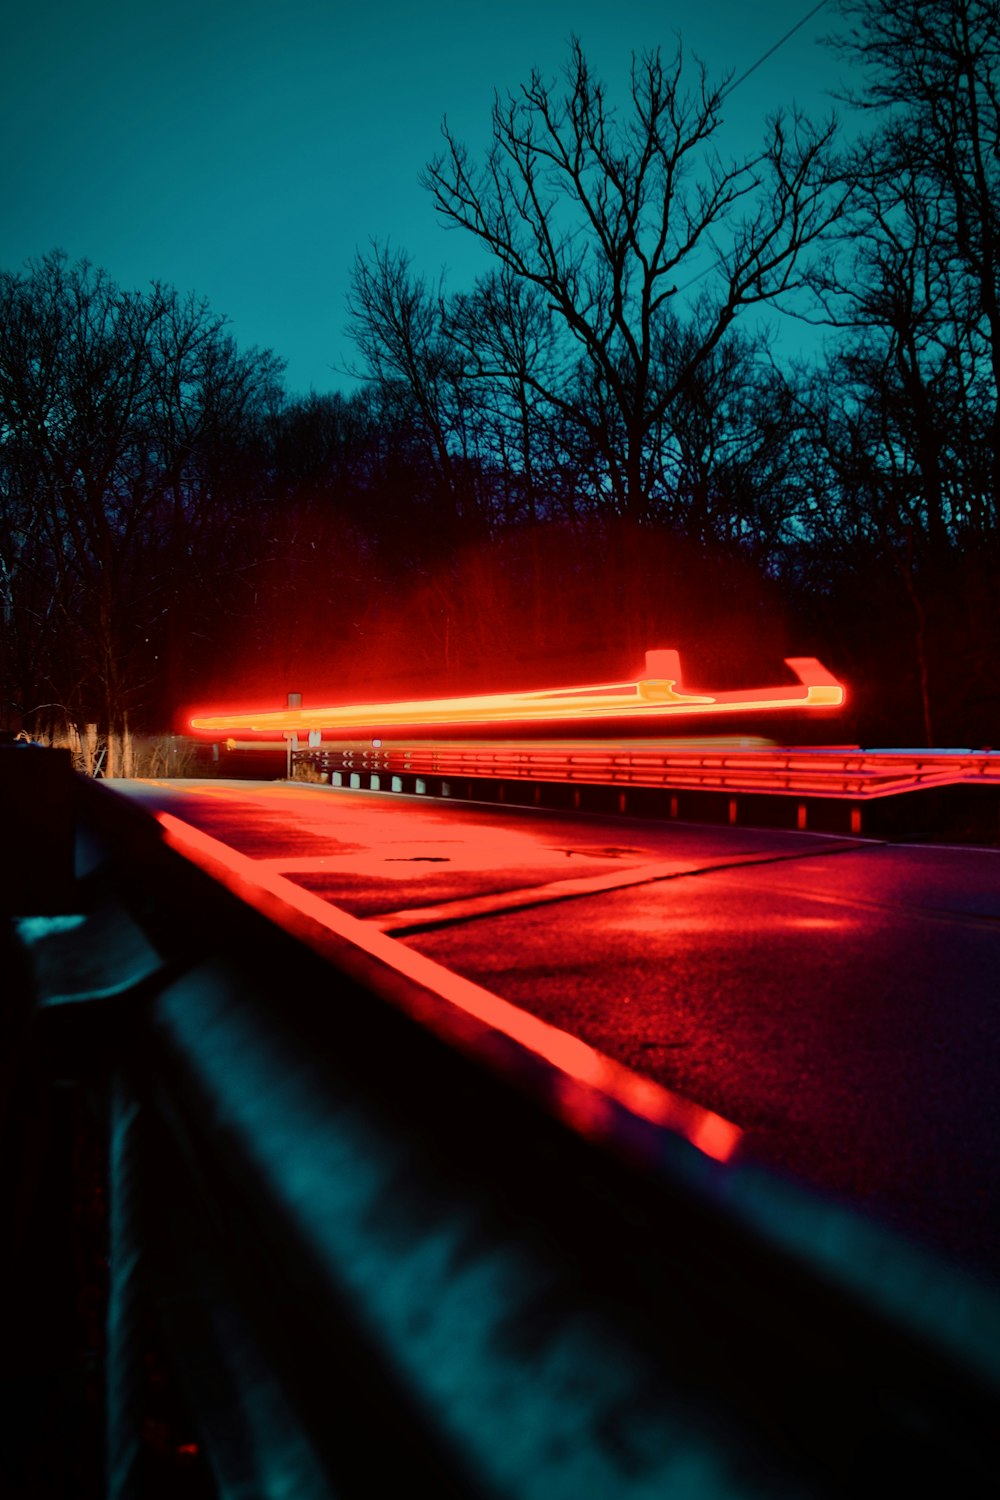 Red And Blue Light Pictures | Download Free Images on Unsplash